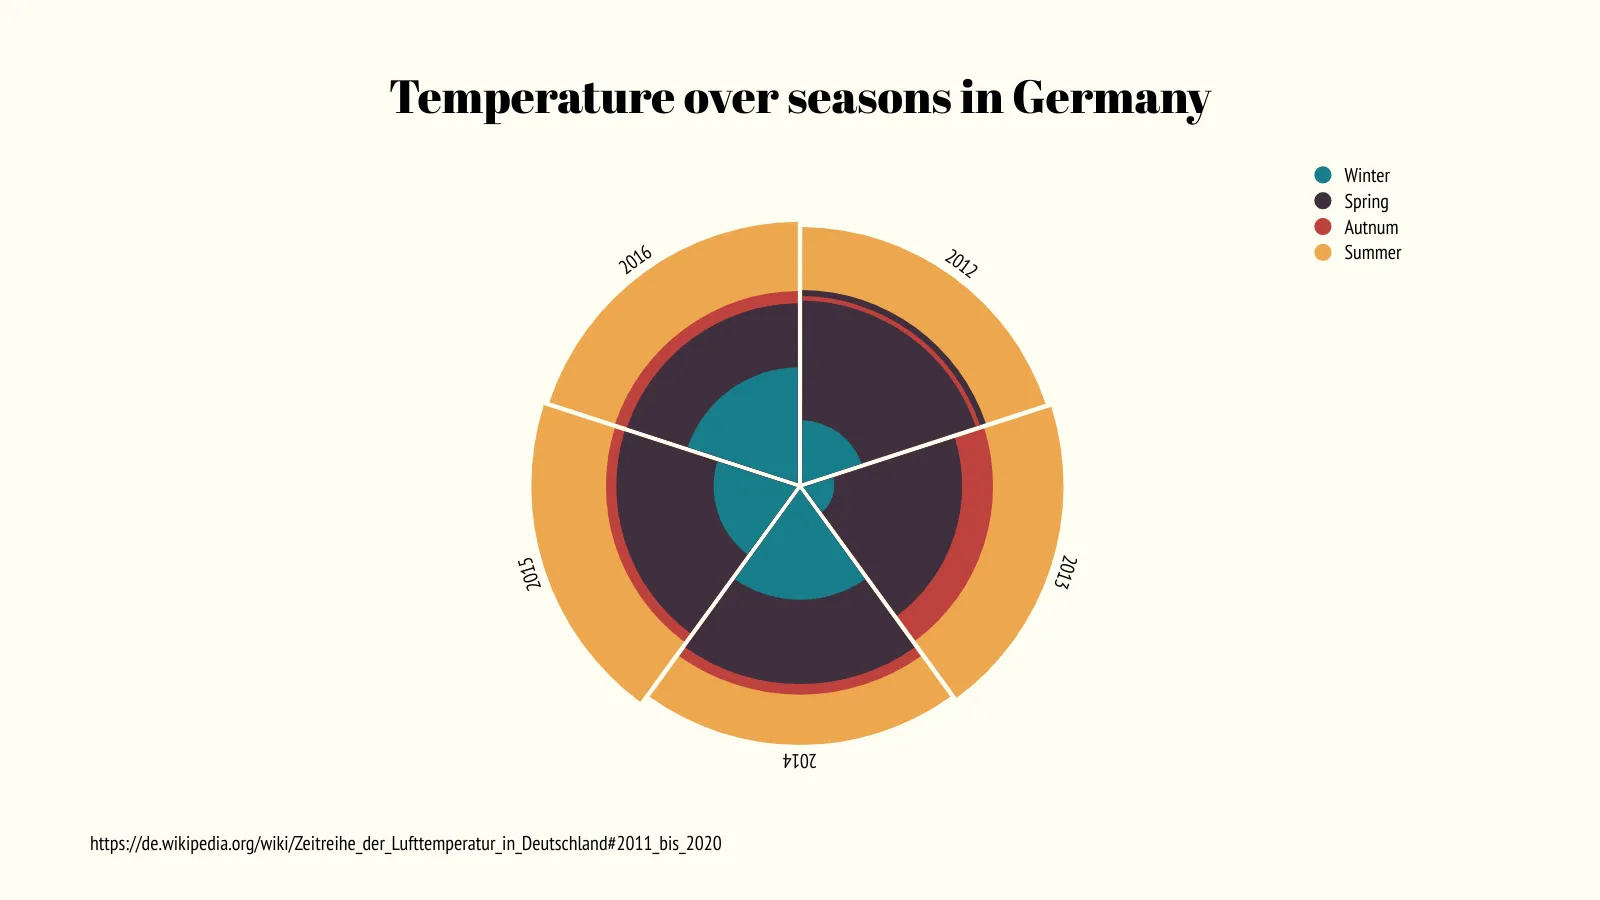 Nightingale's Rose Chart example: Temperature over seasons in Germany